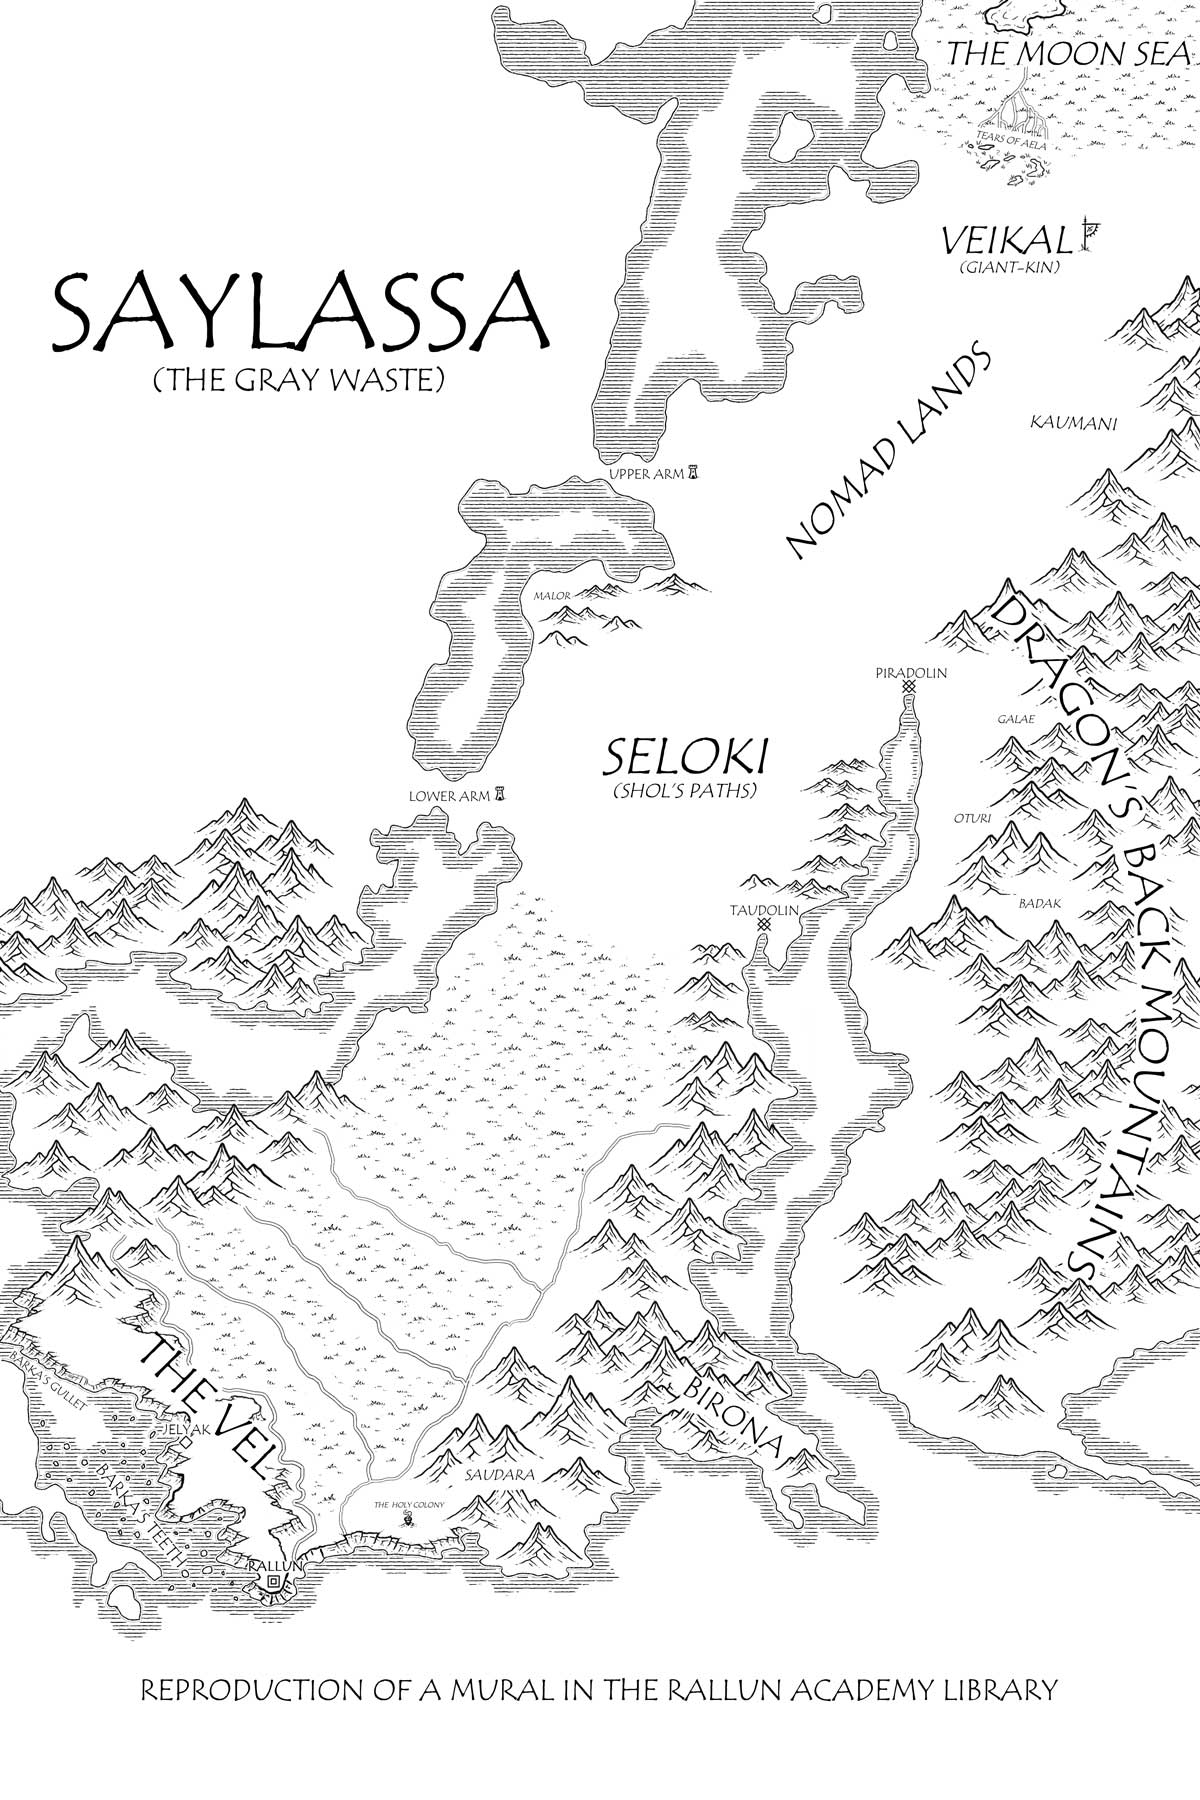 Beyond the Moon Sea map south vailassa